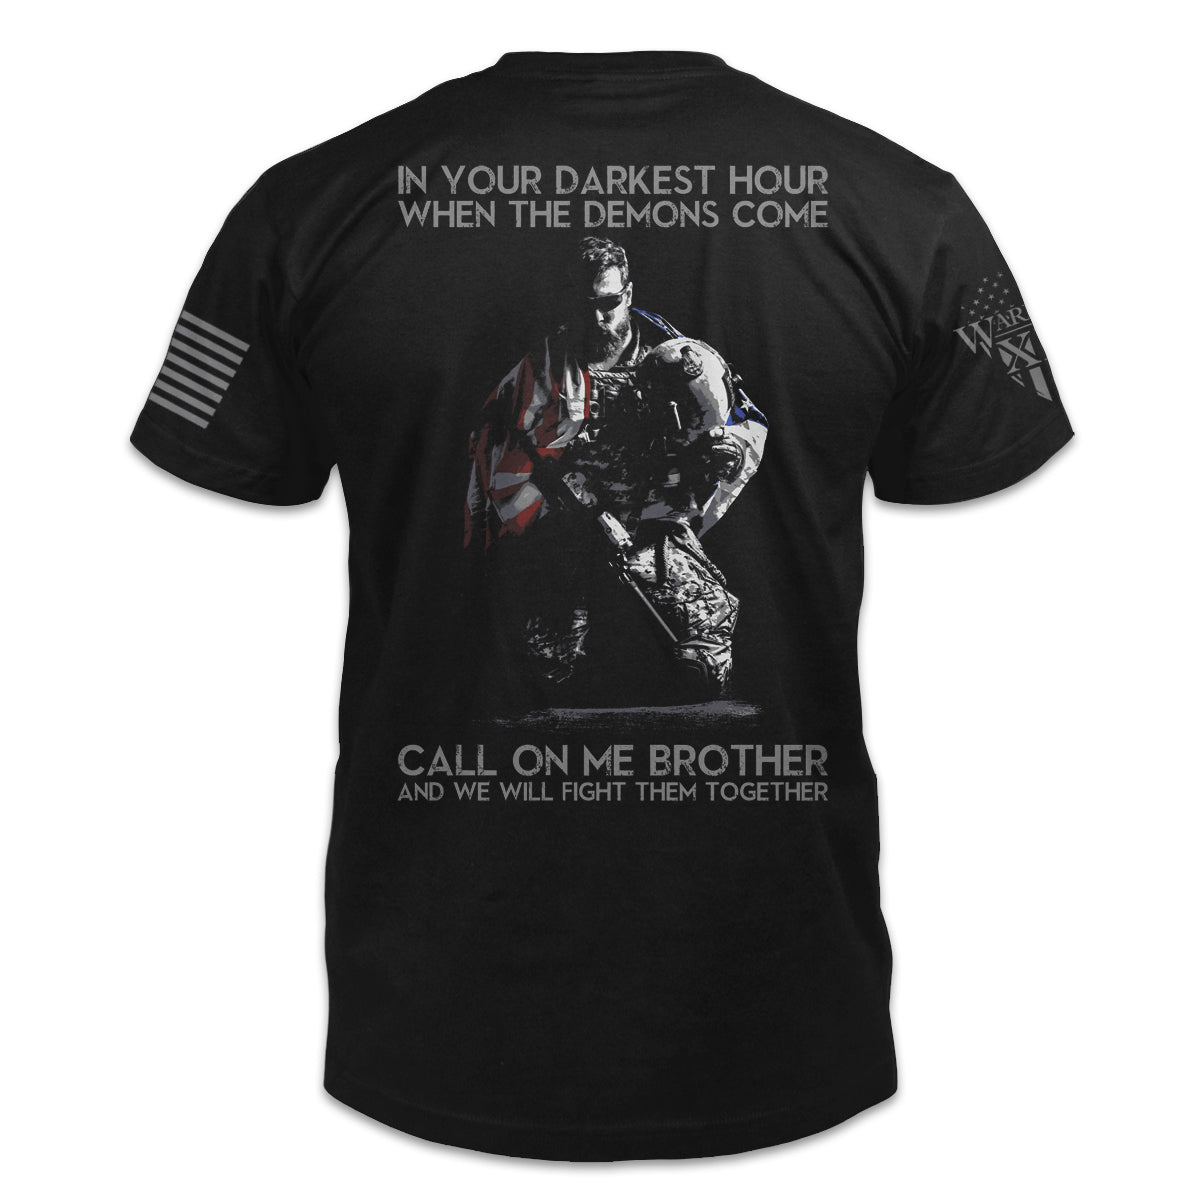 A black t-shirt with the words "In your darkest hour when the demons come, call on me, brother, and we will fight them together" with a soldier printed on the back of the shirt.